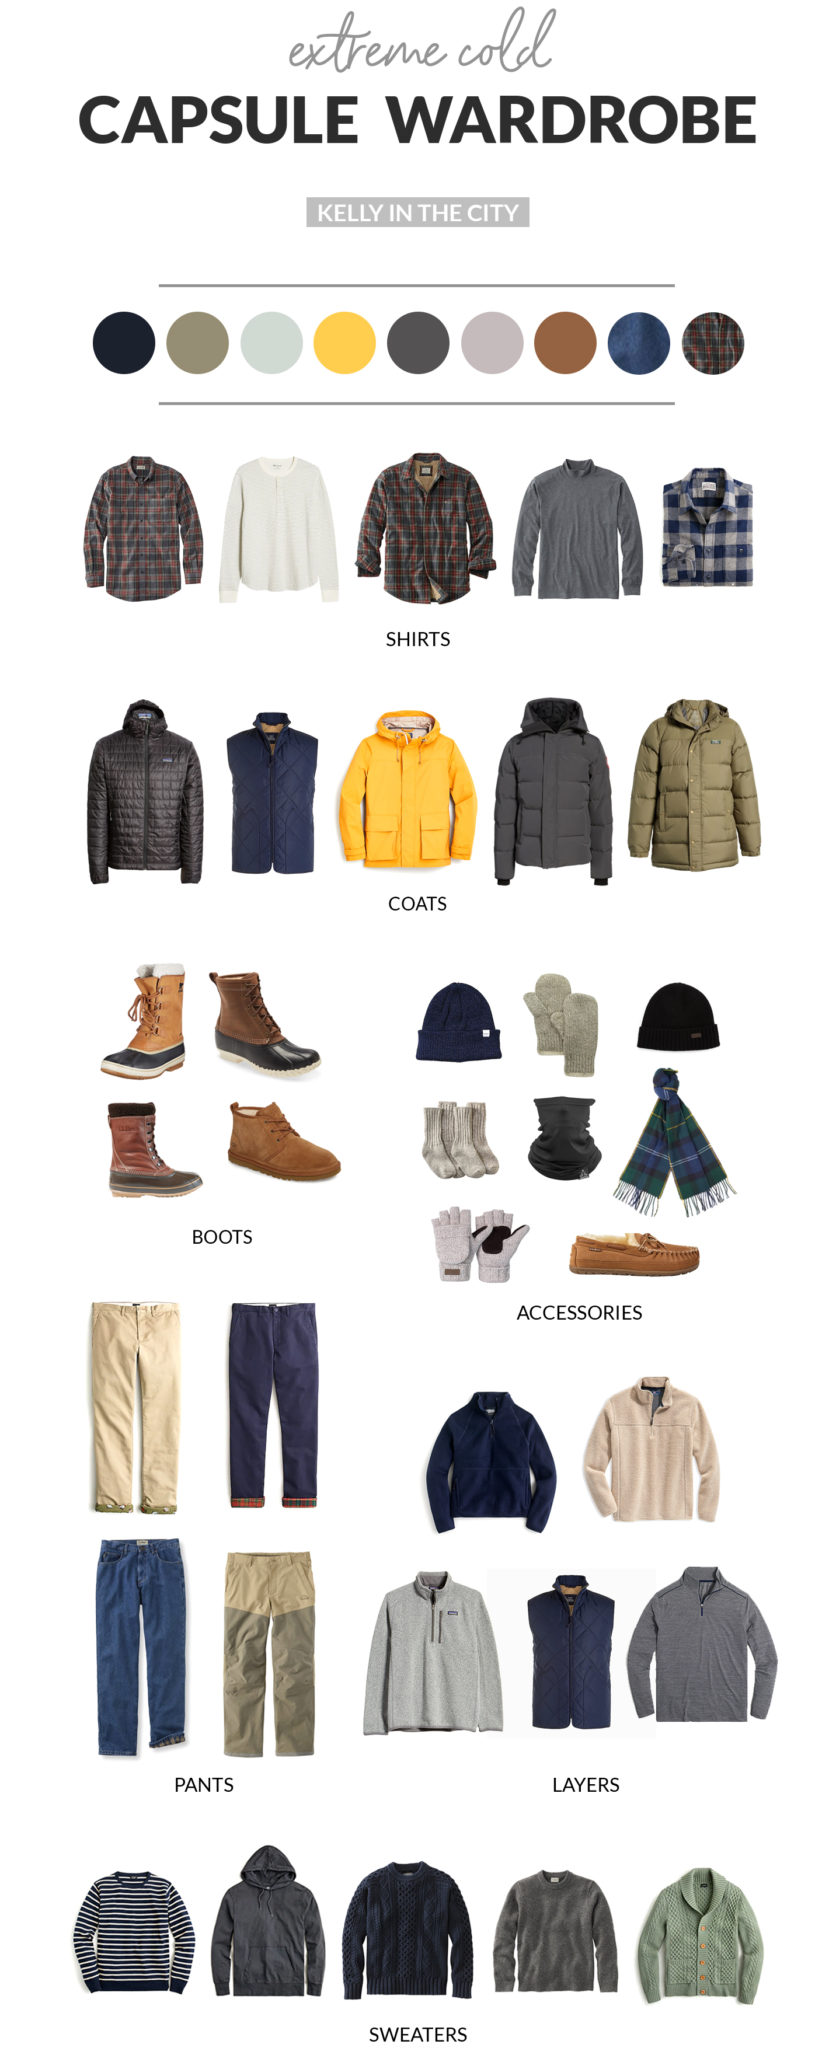 Men's Extreme Cold Capsule Wardrobe - Kelly in the City